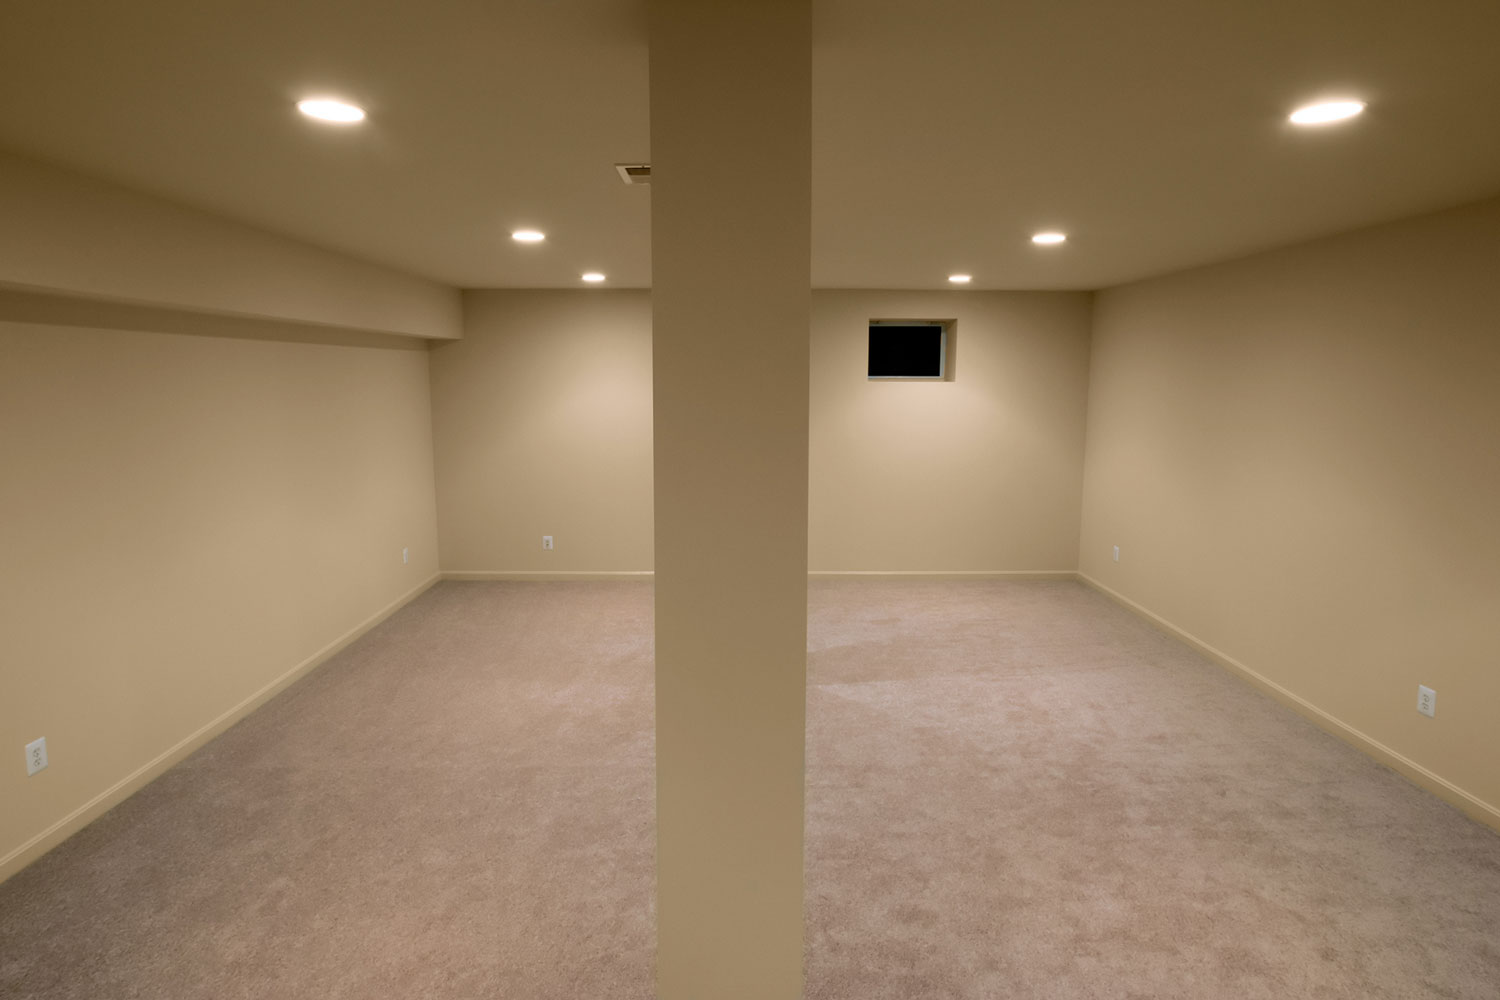 Interior of an empty basement with tan walls and recessed lighting